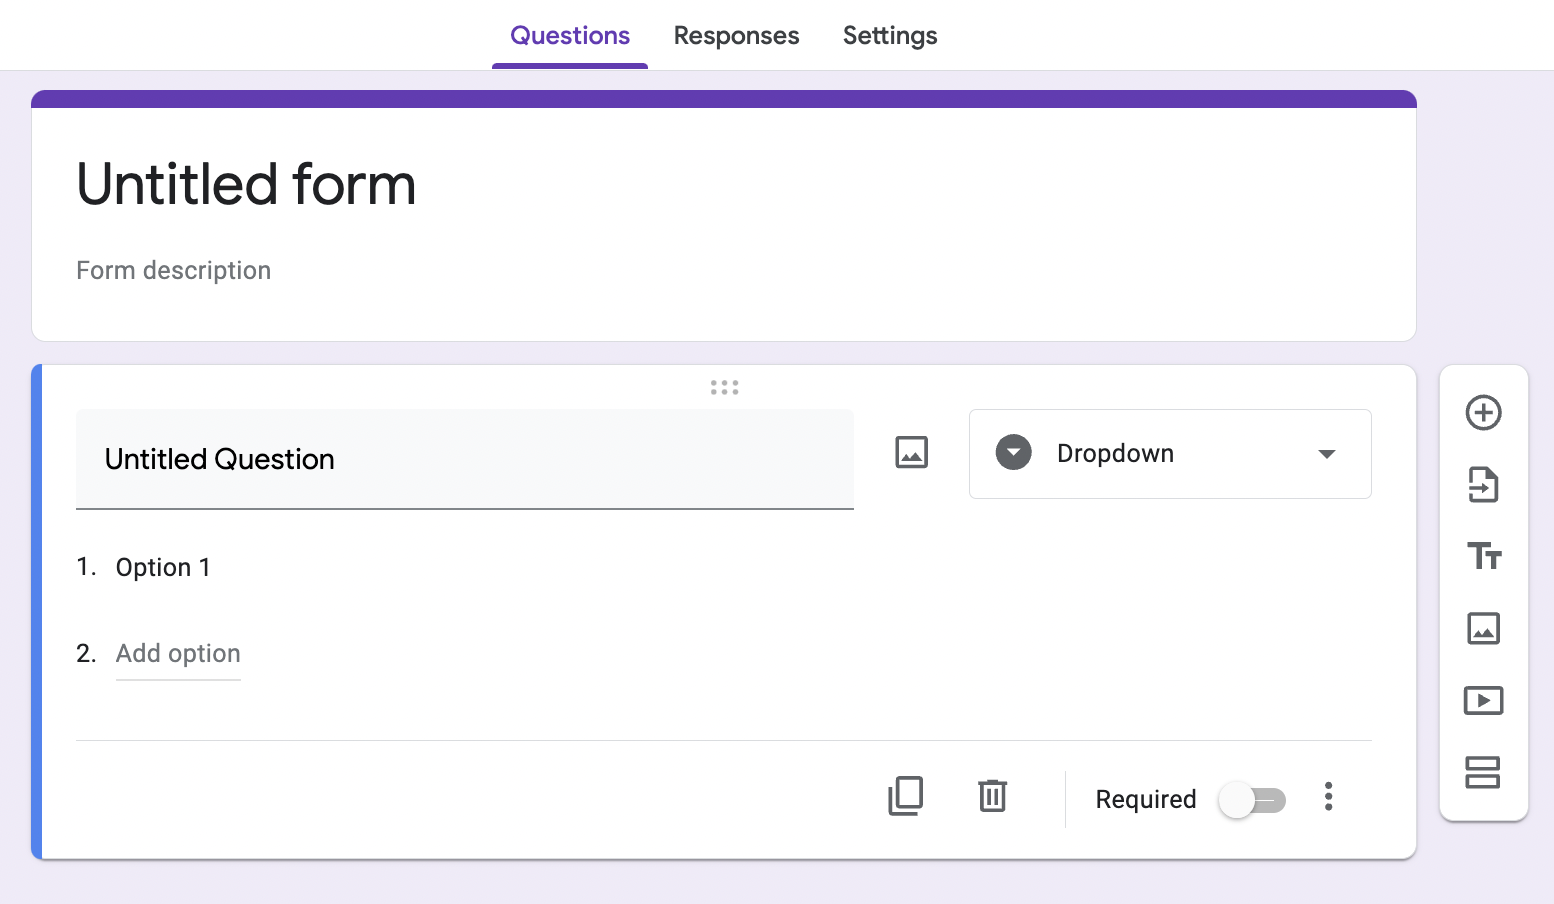 customer satisfaction tools listicle: Google Forms survey builder